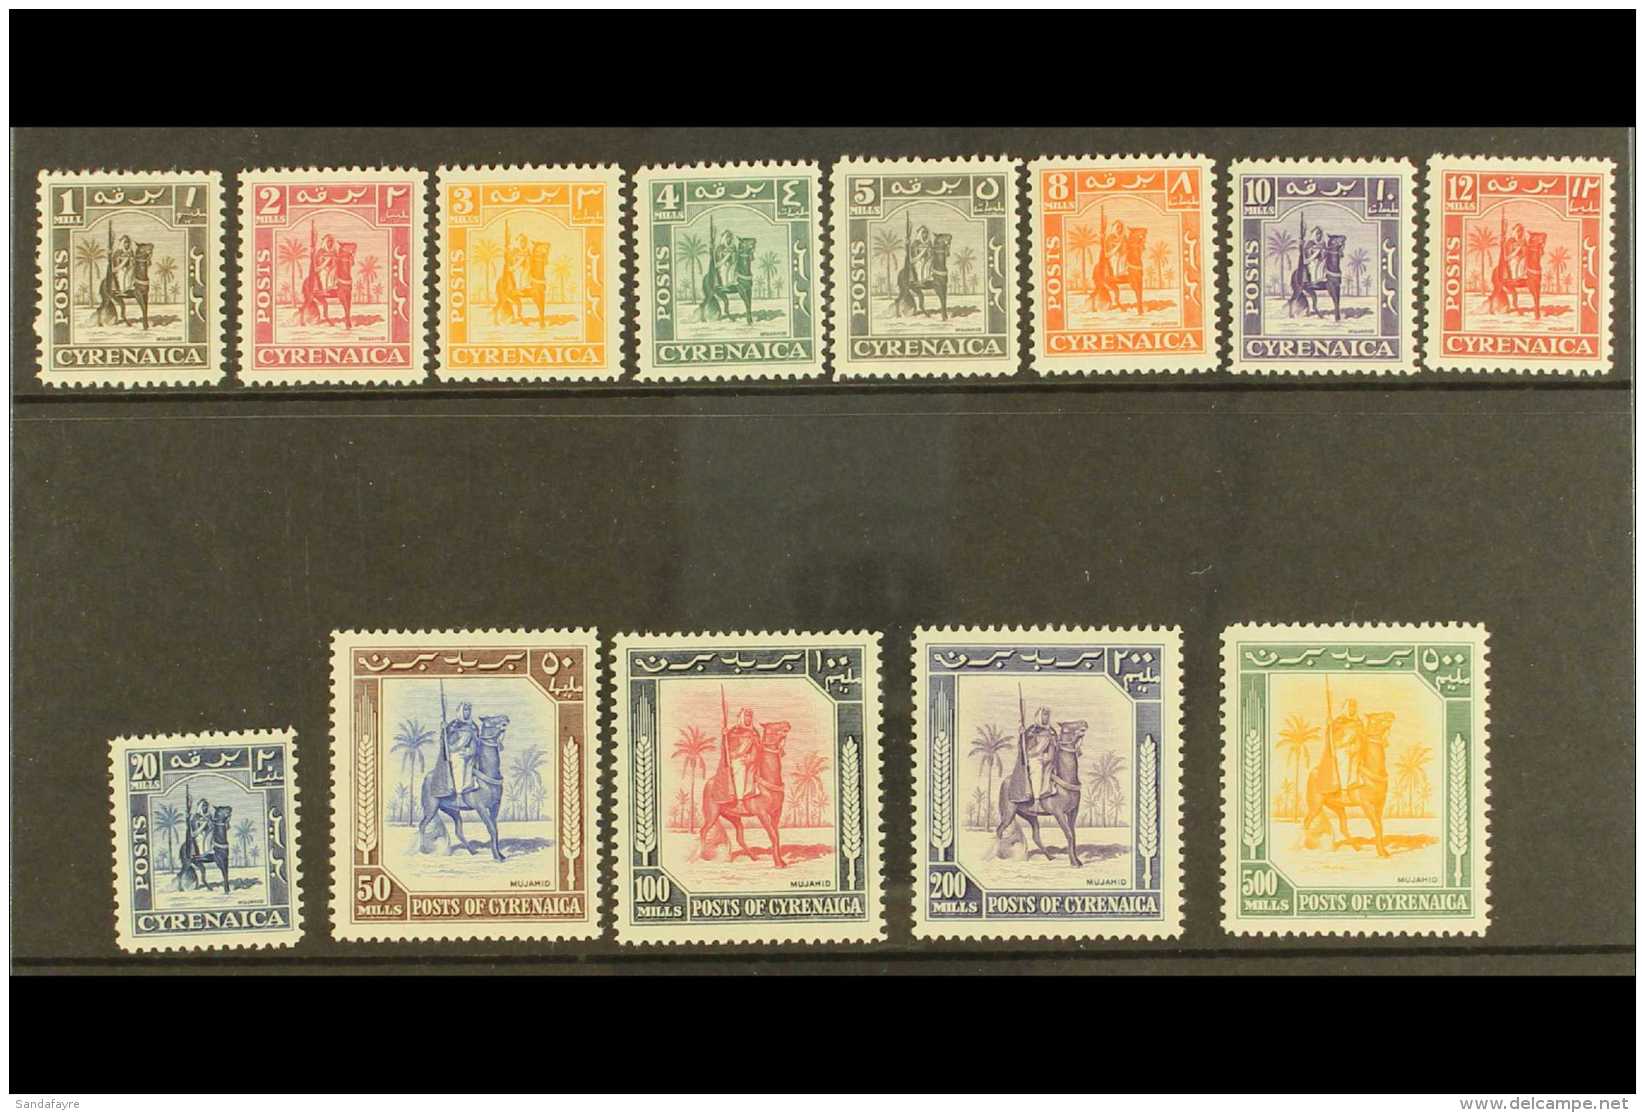 CYRENAICA 1950 Mounted Warrior Complete Set, SG 136/48, Very Fine Never Hinged Mint, Fresh. (13 Stamps) For More... - Italian Eastern Africa